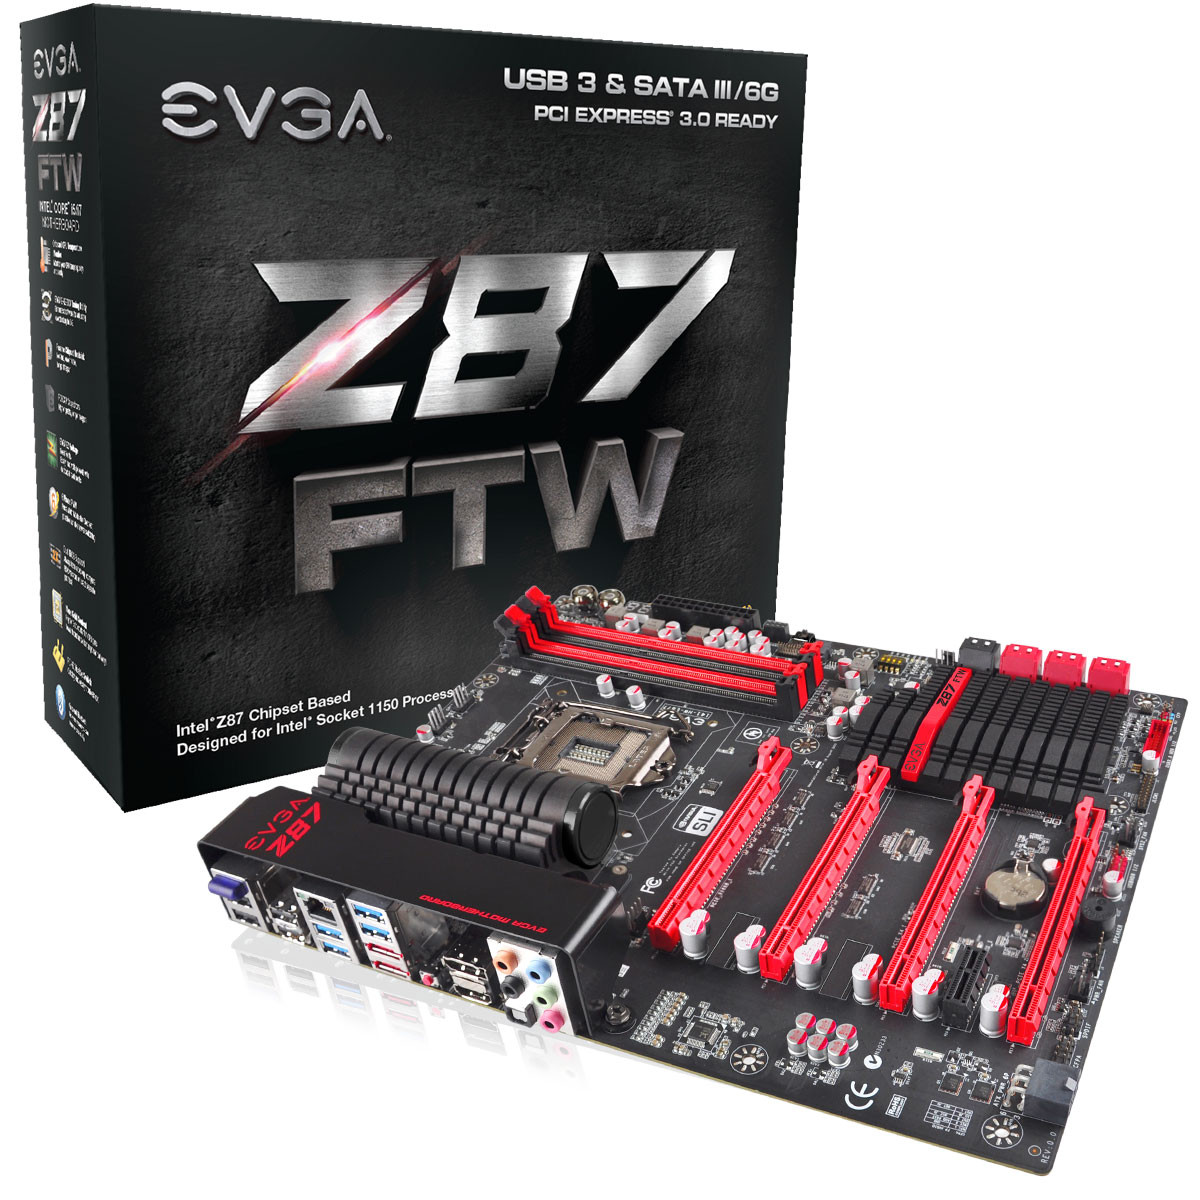 Z87 Motherboards Ready for Upcoming 4th Generation Intel Core CPUs | TechPowerUp